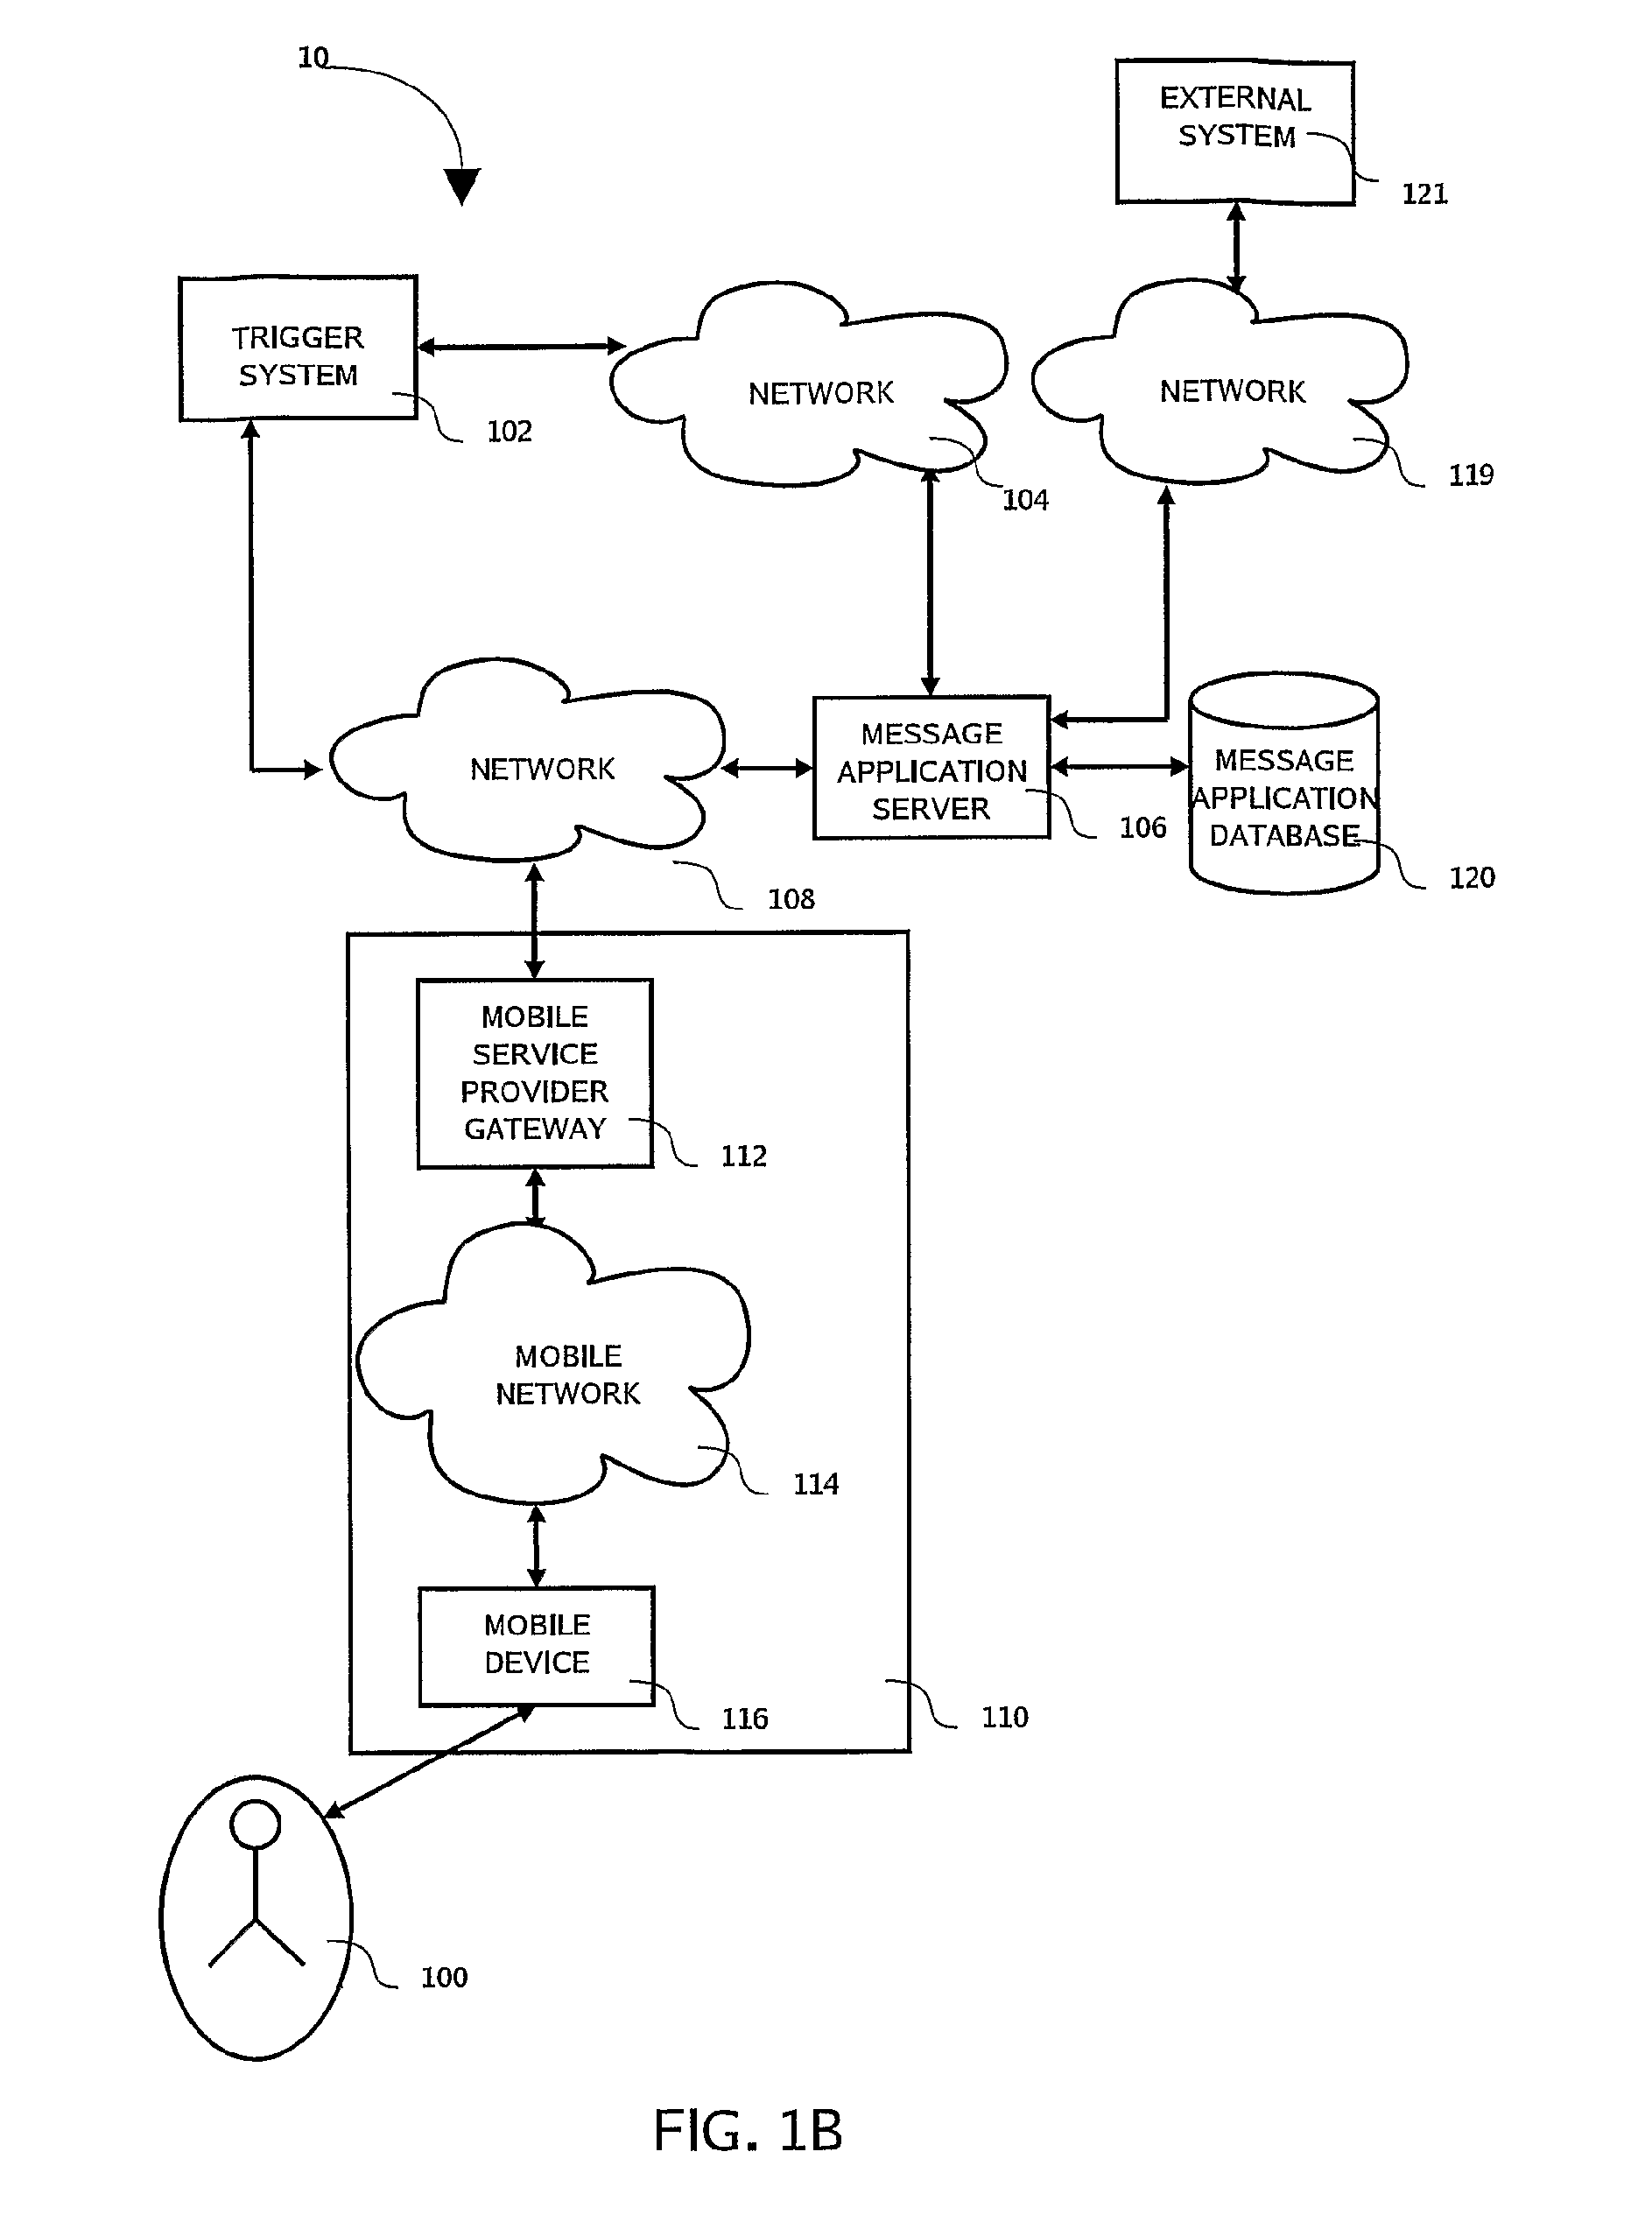 System and method to initiate a mobile data communication utilizing a trigger system